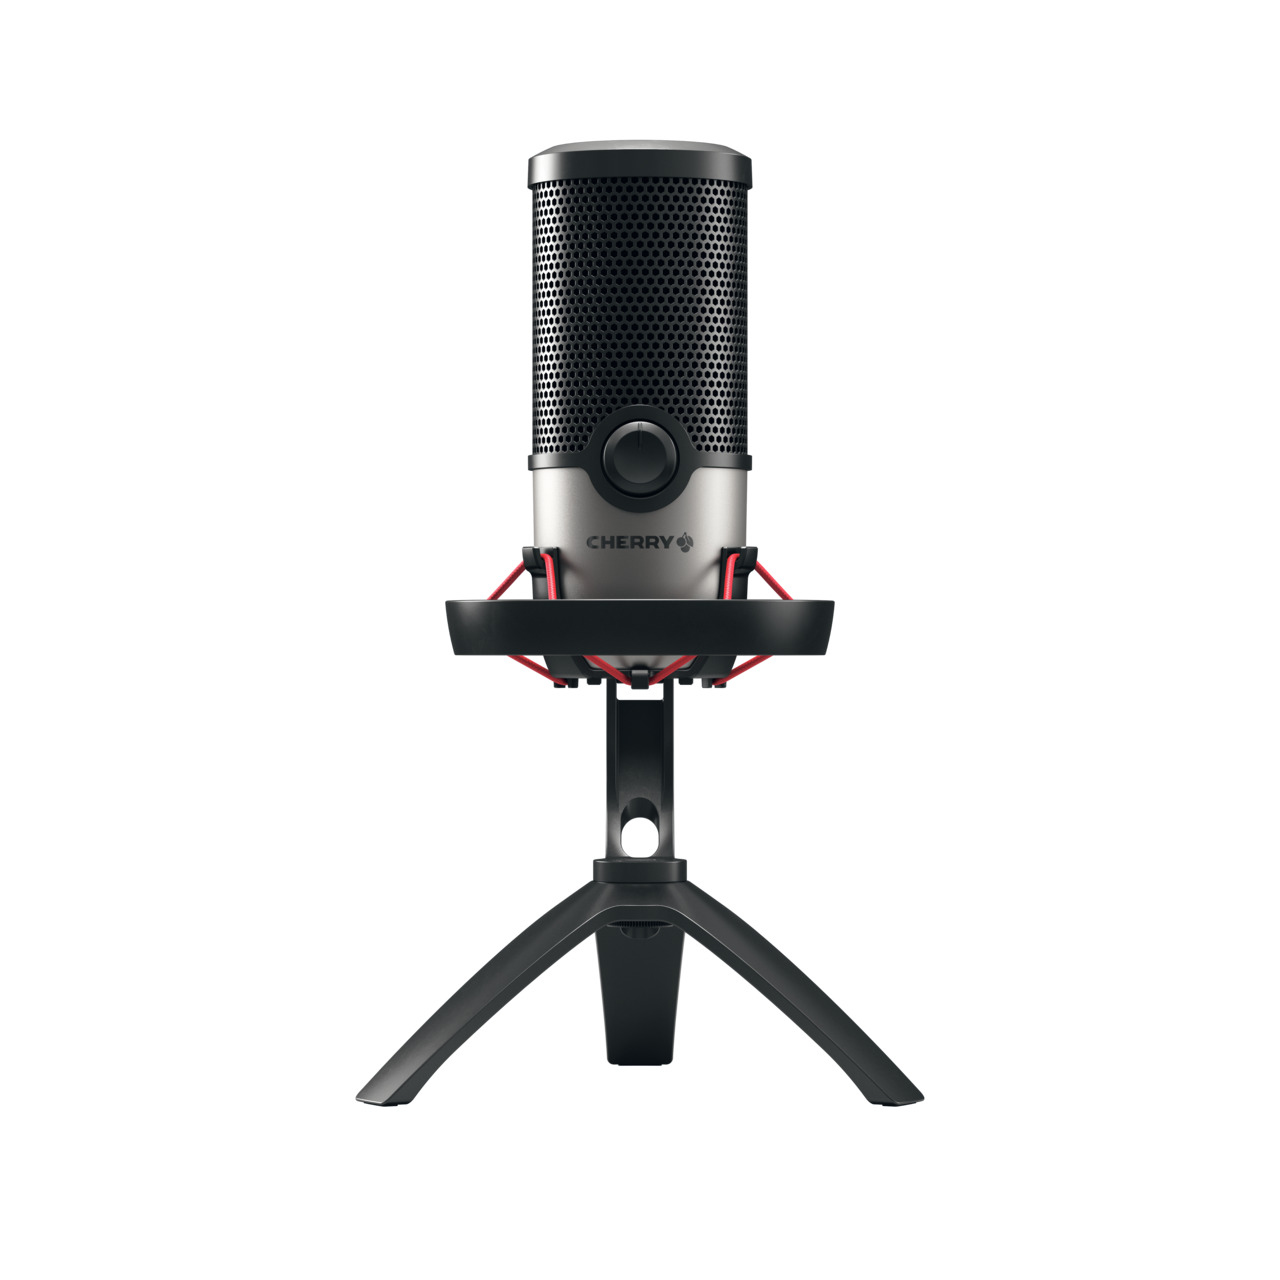 CHERRY UM 6.0 USB MICROPHONE, WITH SHOCK MOUNT FOR STREAMING AND OFFICE USE.